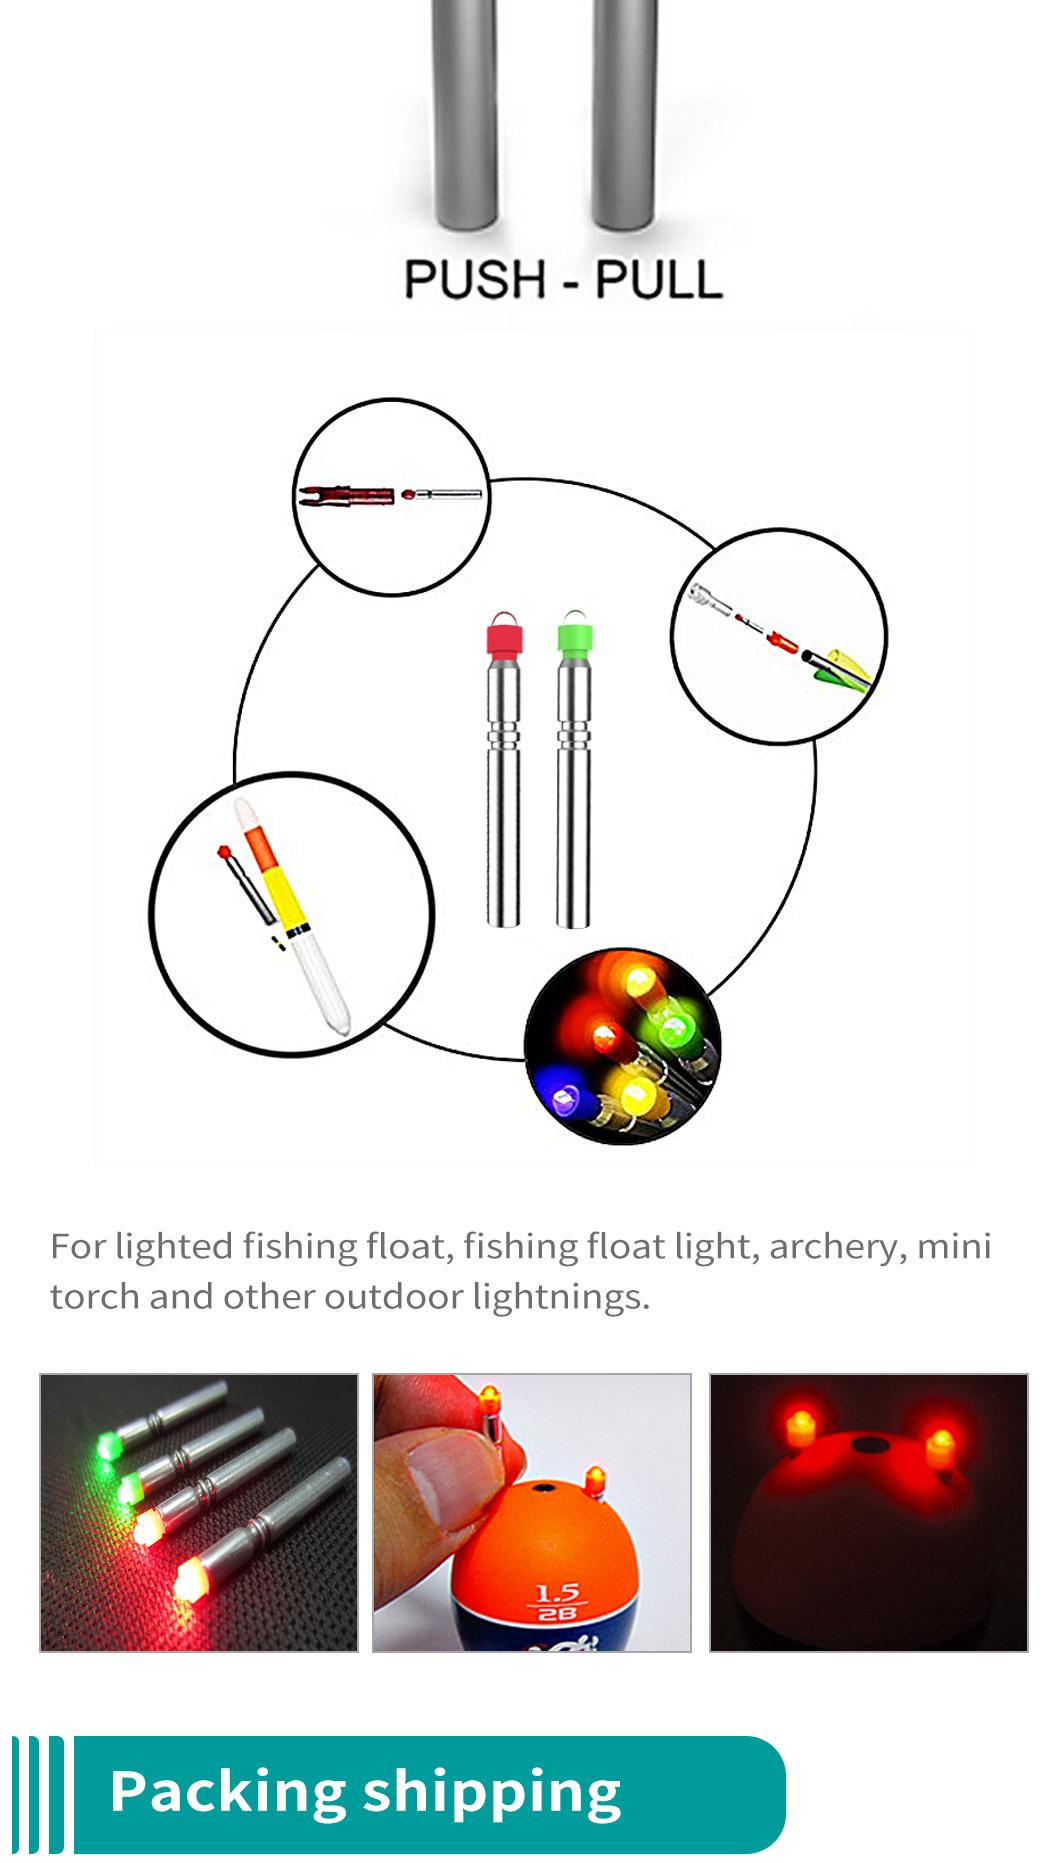 Dlyfull 3.0V Fishing Float LED Stick PS327 Green 2PCS (one card) for Night Fishing or Archery